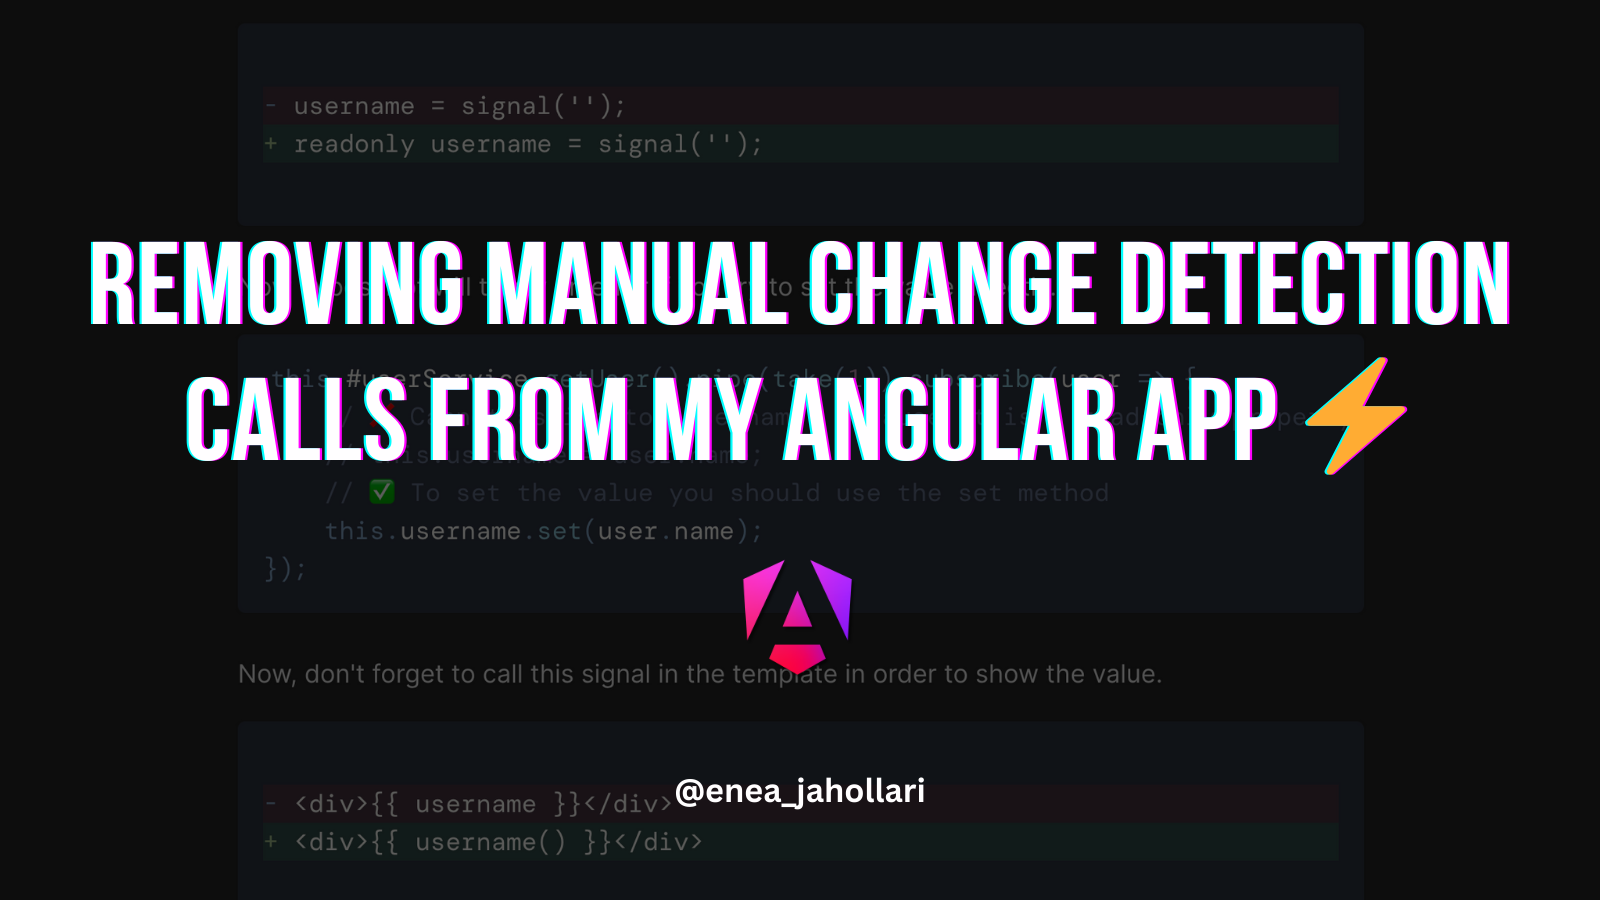 Learn step by step how to remove manual change detection calls from your Angular application and make it more robust.